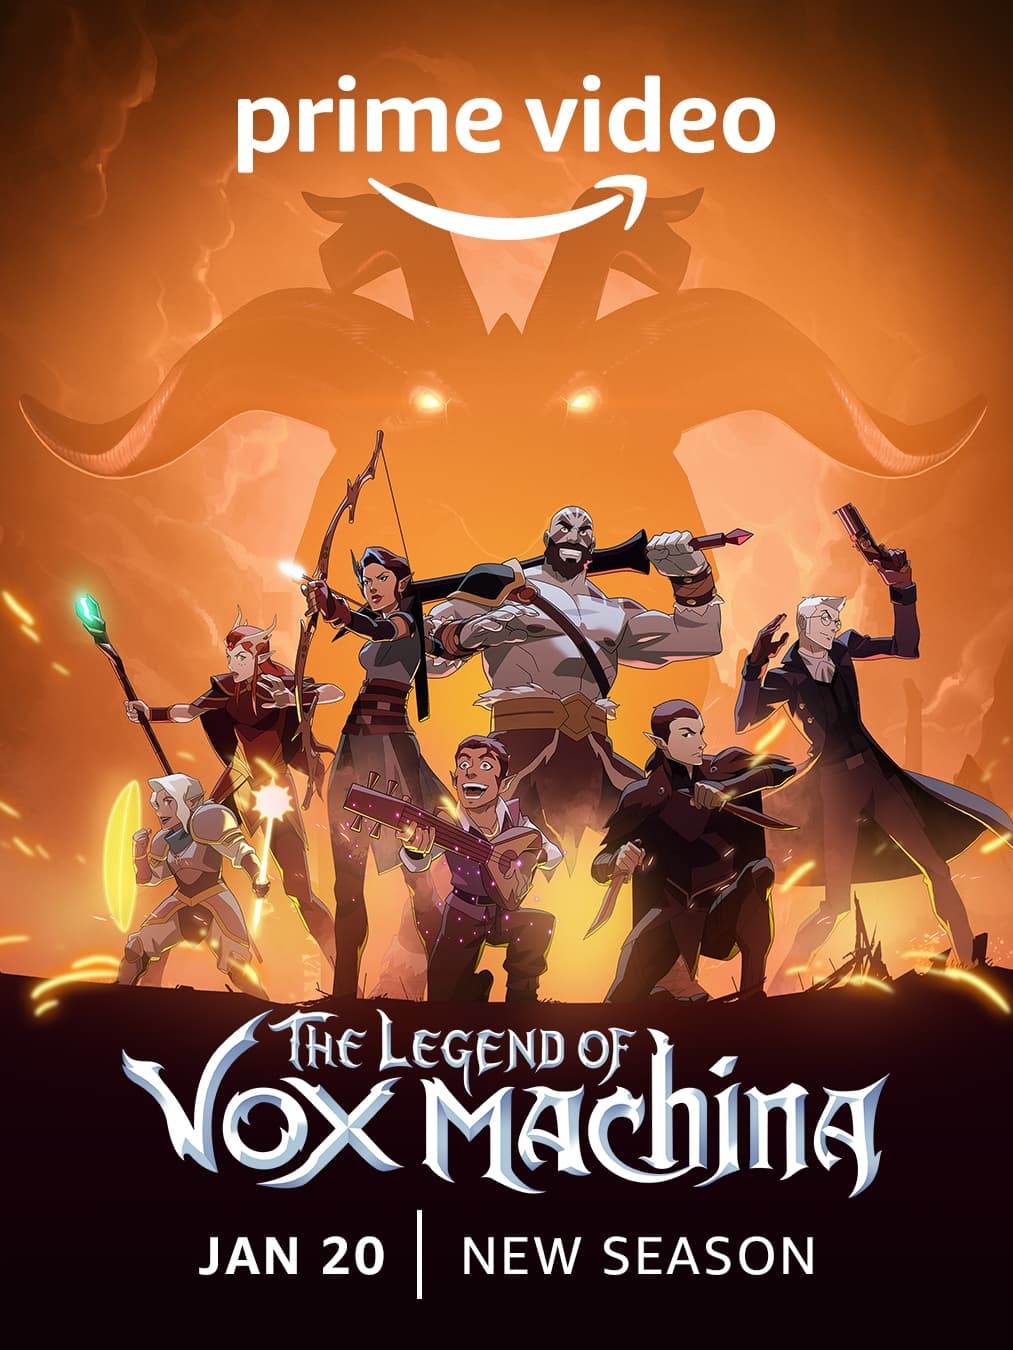 Download The Legend of Vox Machina S02 – Amazon Prime (2023) Dual Audio {Hindi ORG+English] Complete Netflix Web Series 1080p [4.8GB] | 720p [2GB] | 480p [900MB] download